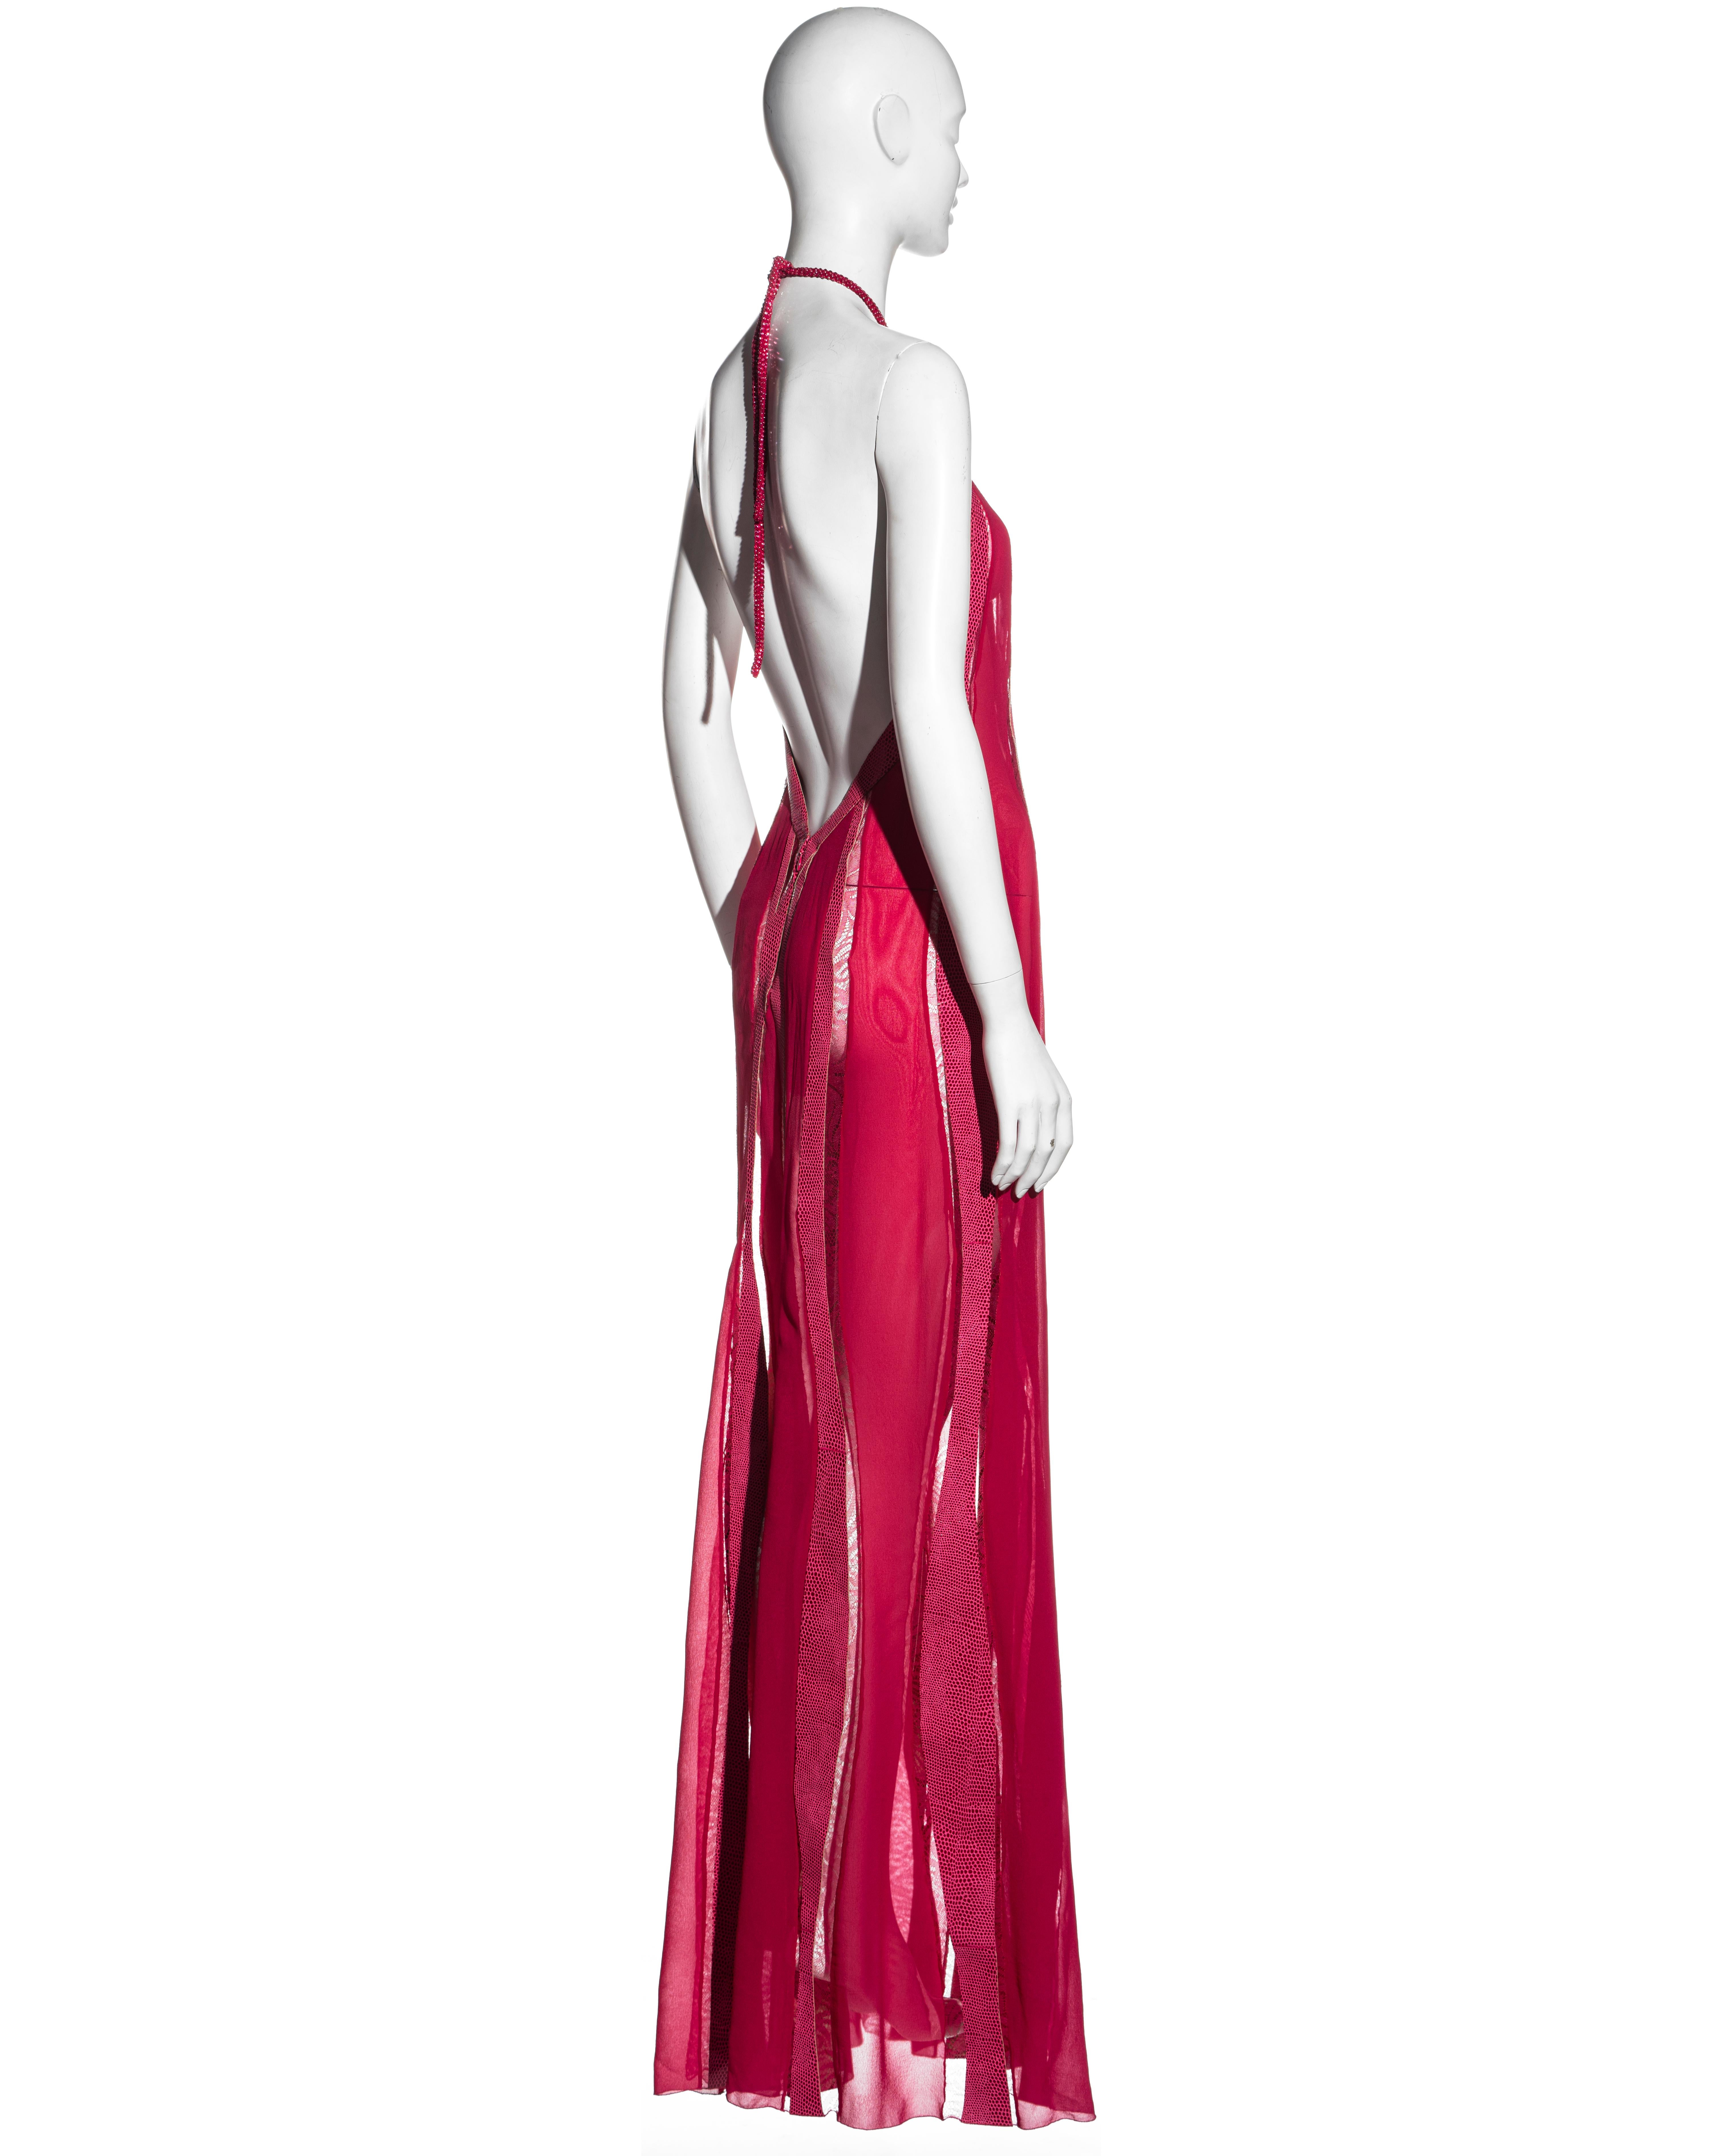 Gianni Versace pink silk, leather and lace halter neck maxi dress, fw 2000 For Sale 2